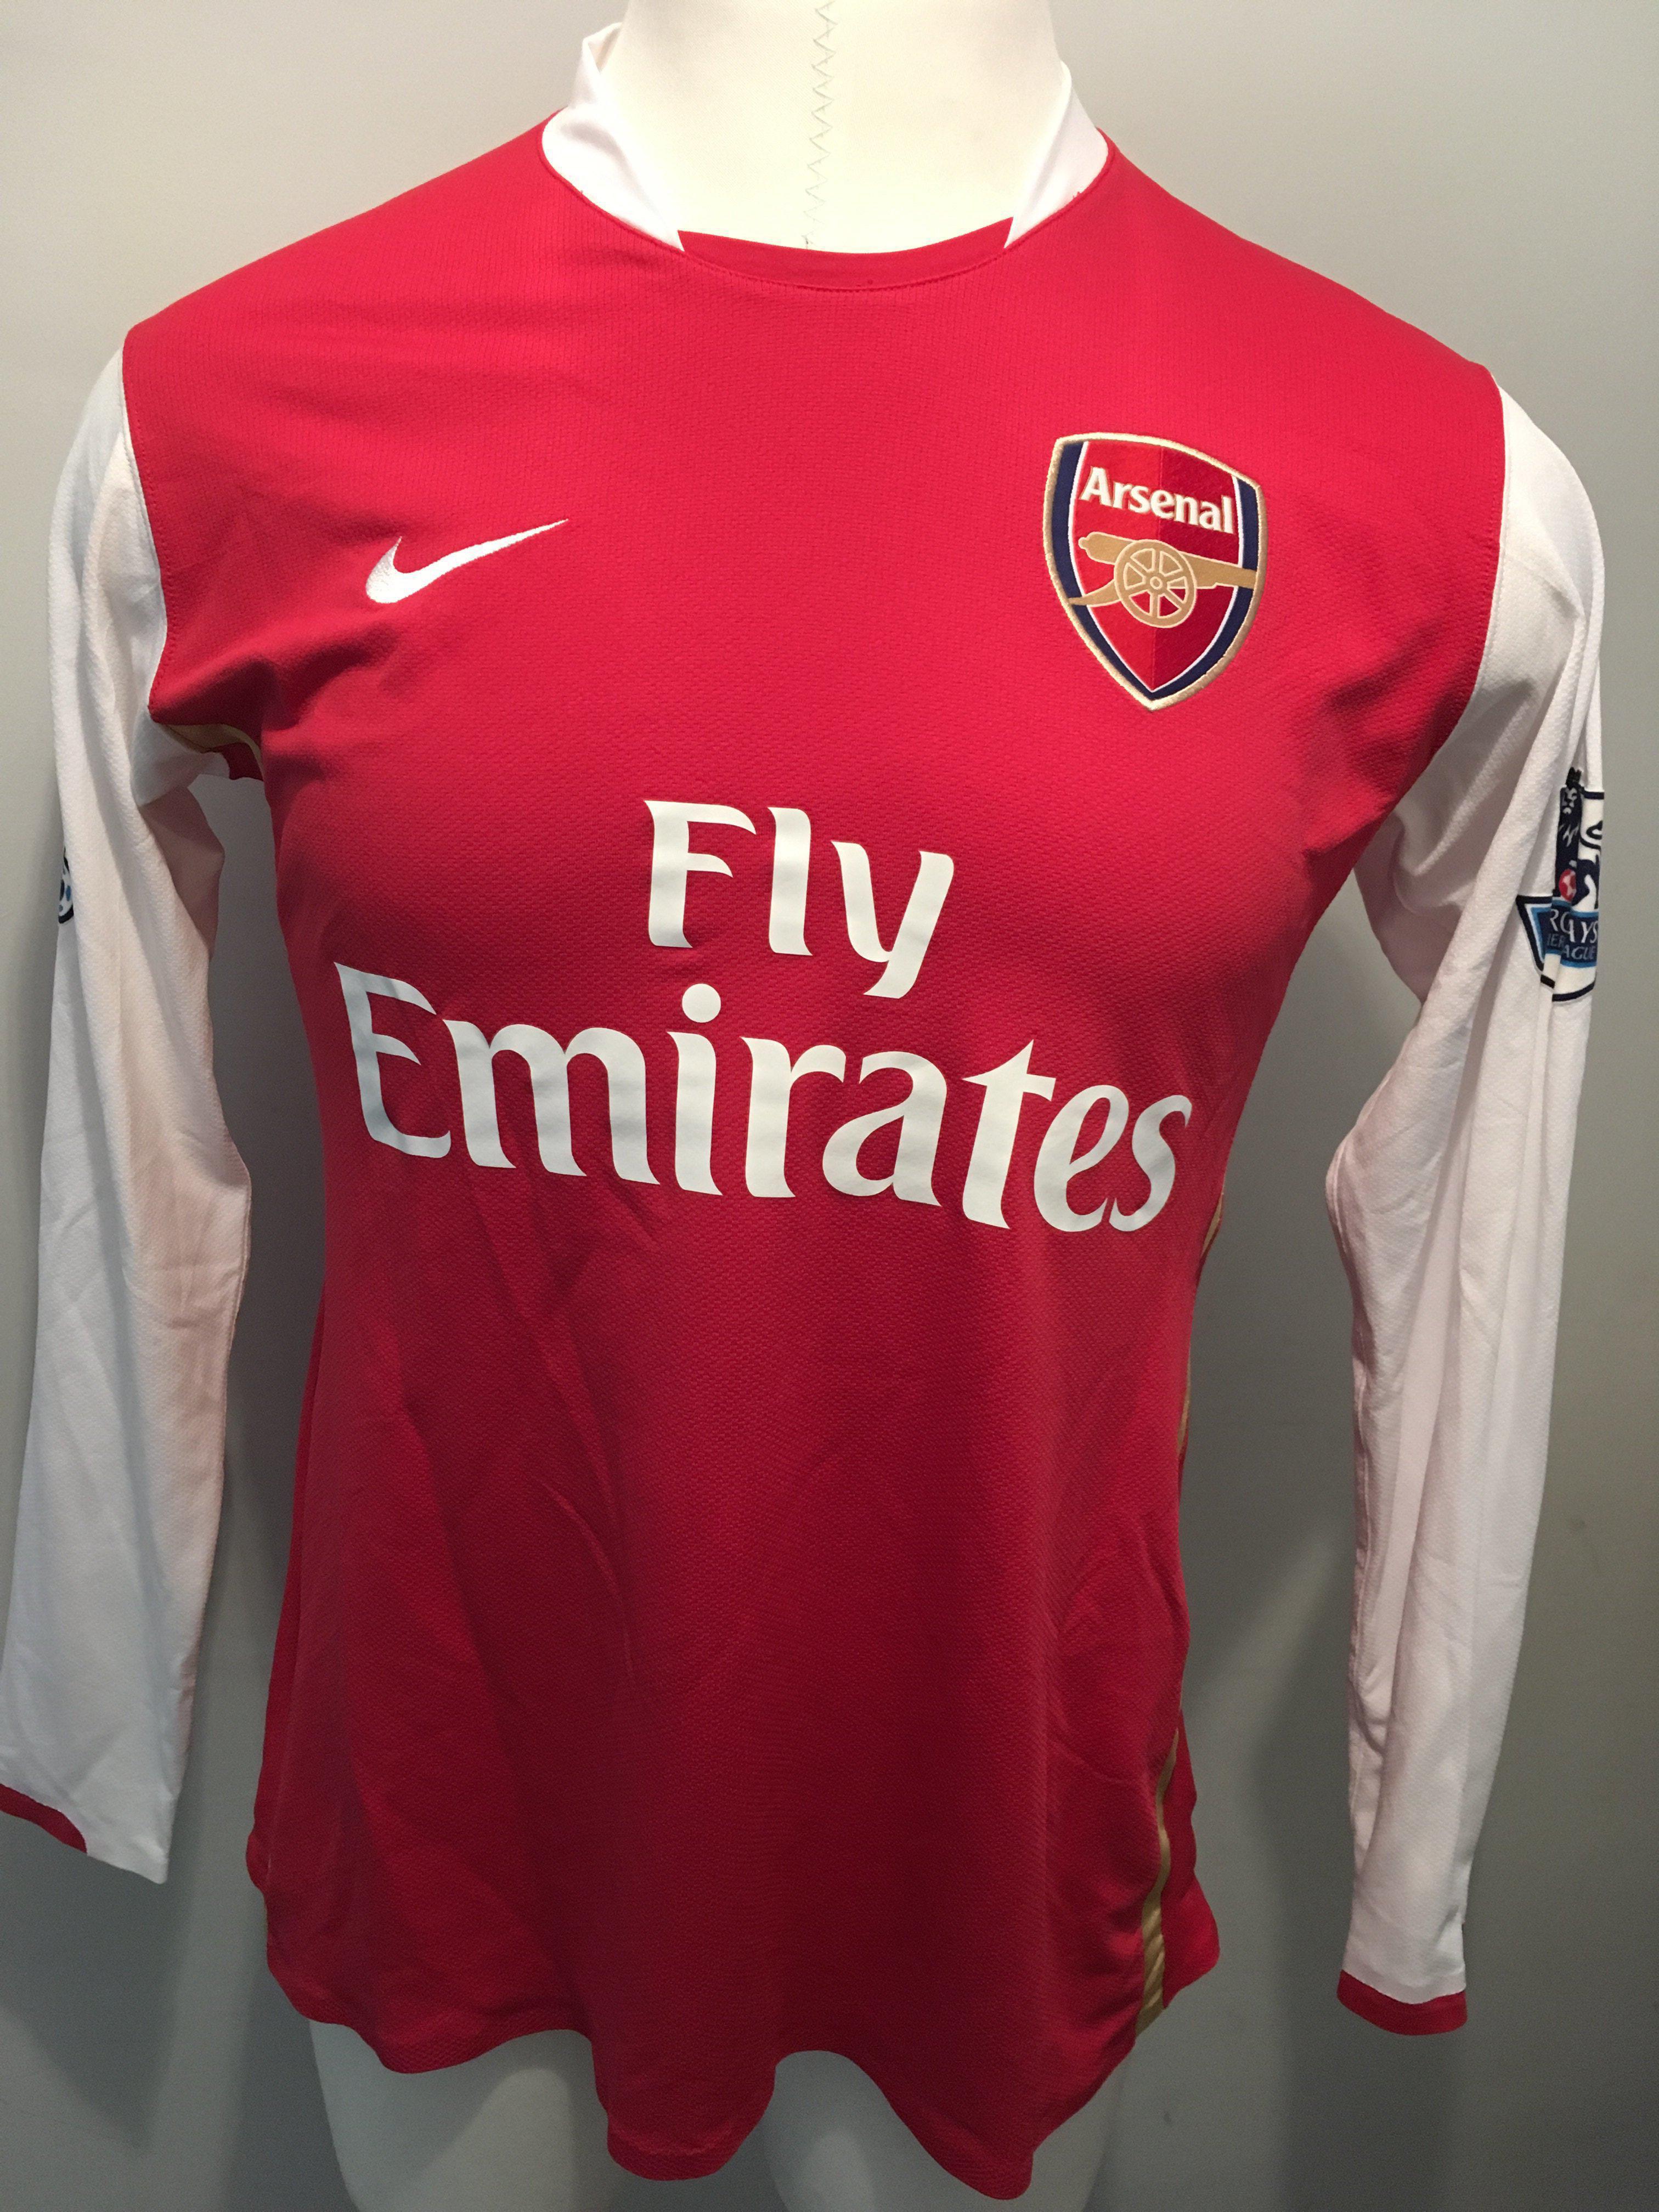 2007/2008 Arsenal Match Worn Football Shirt: Long sleeve red Nike shirt with Fly Emirates - Image 2 of 2